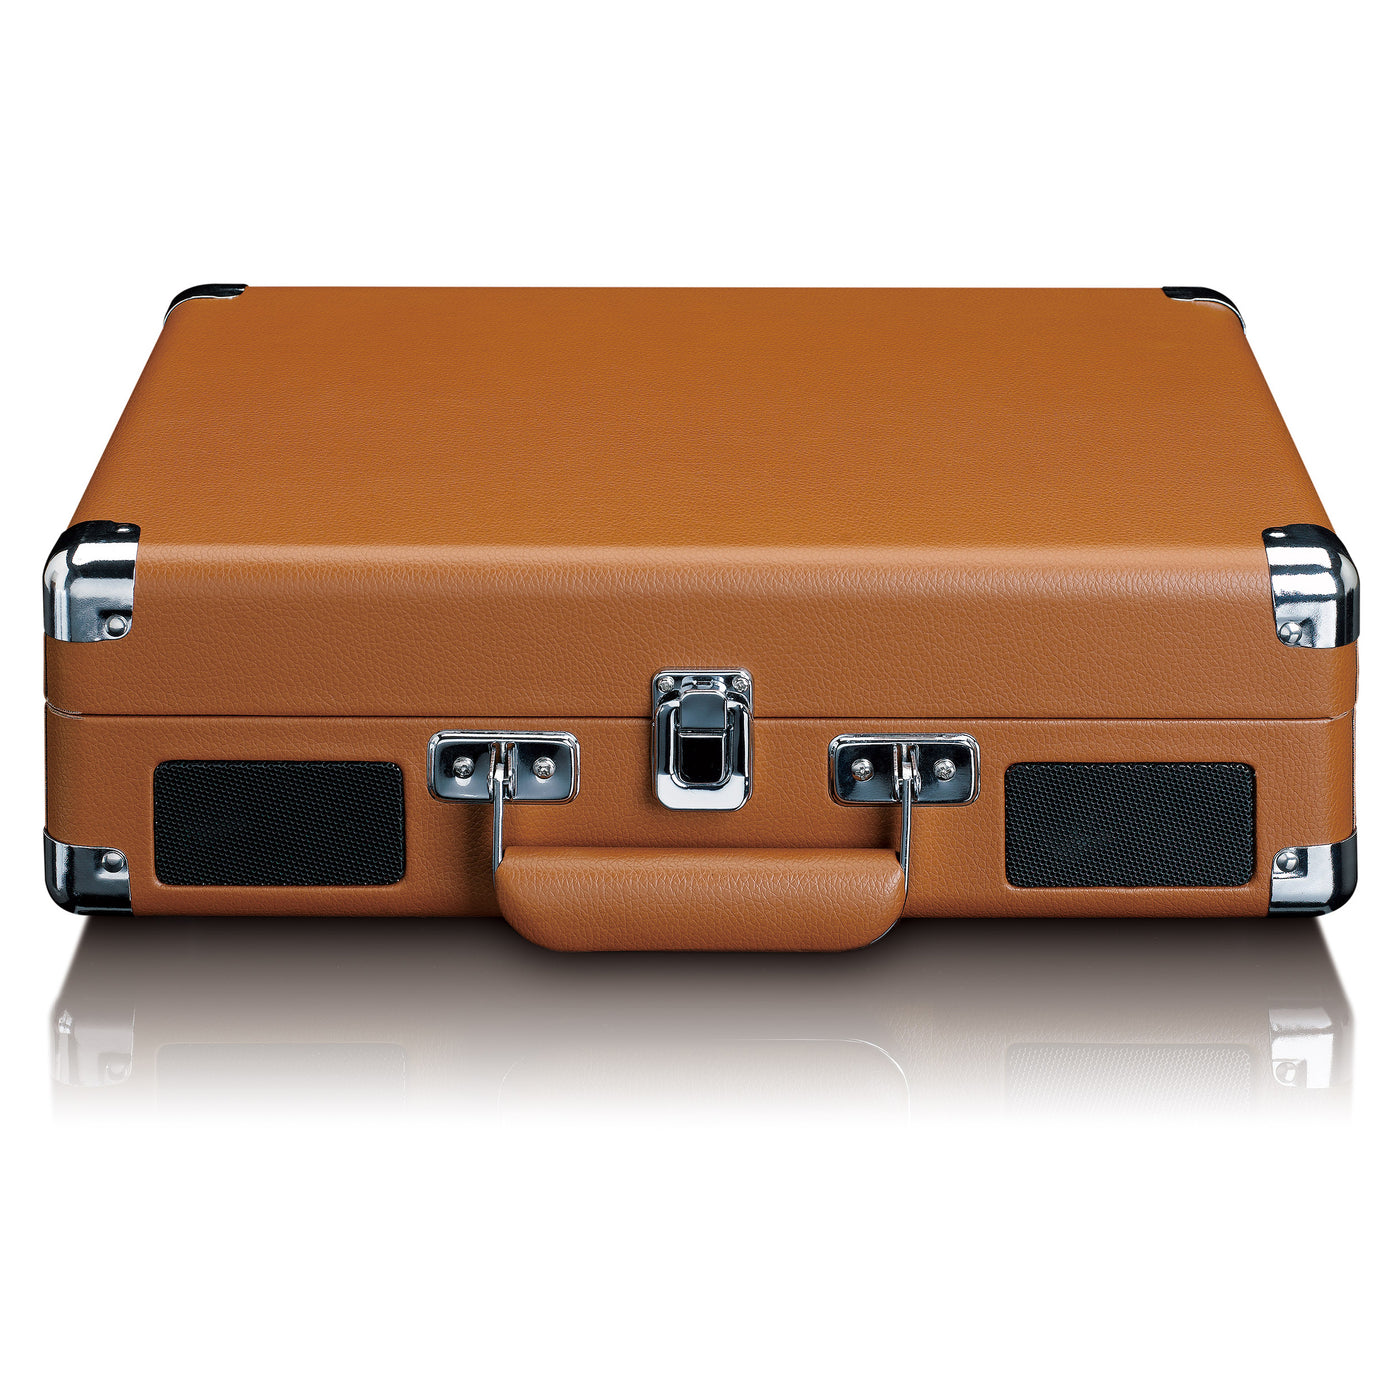 CLASSIC PHONO TT-10BN - Suitcase Record Player with speakers - Brown